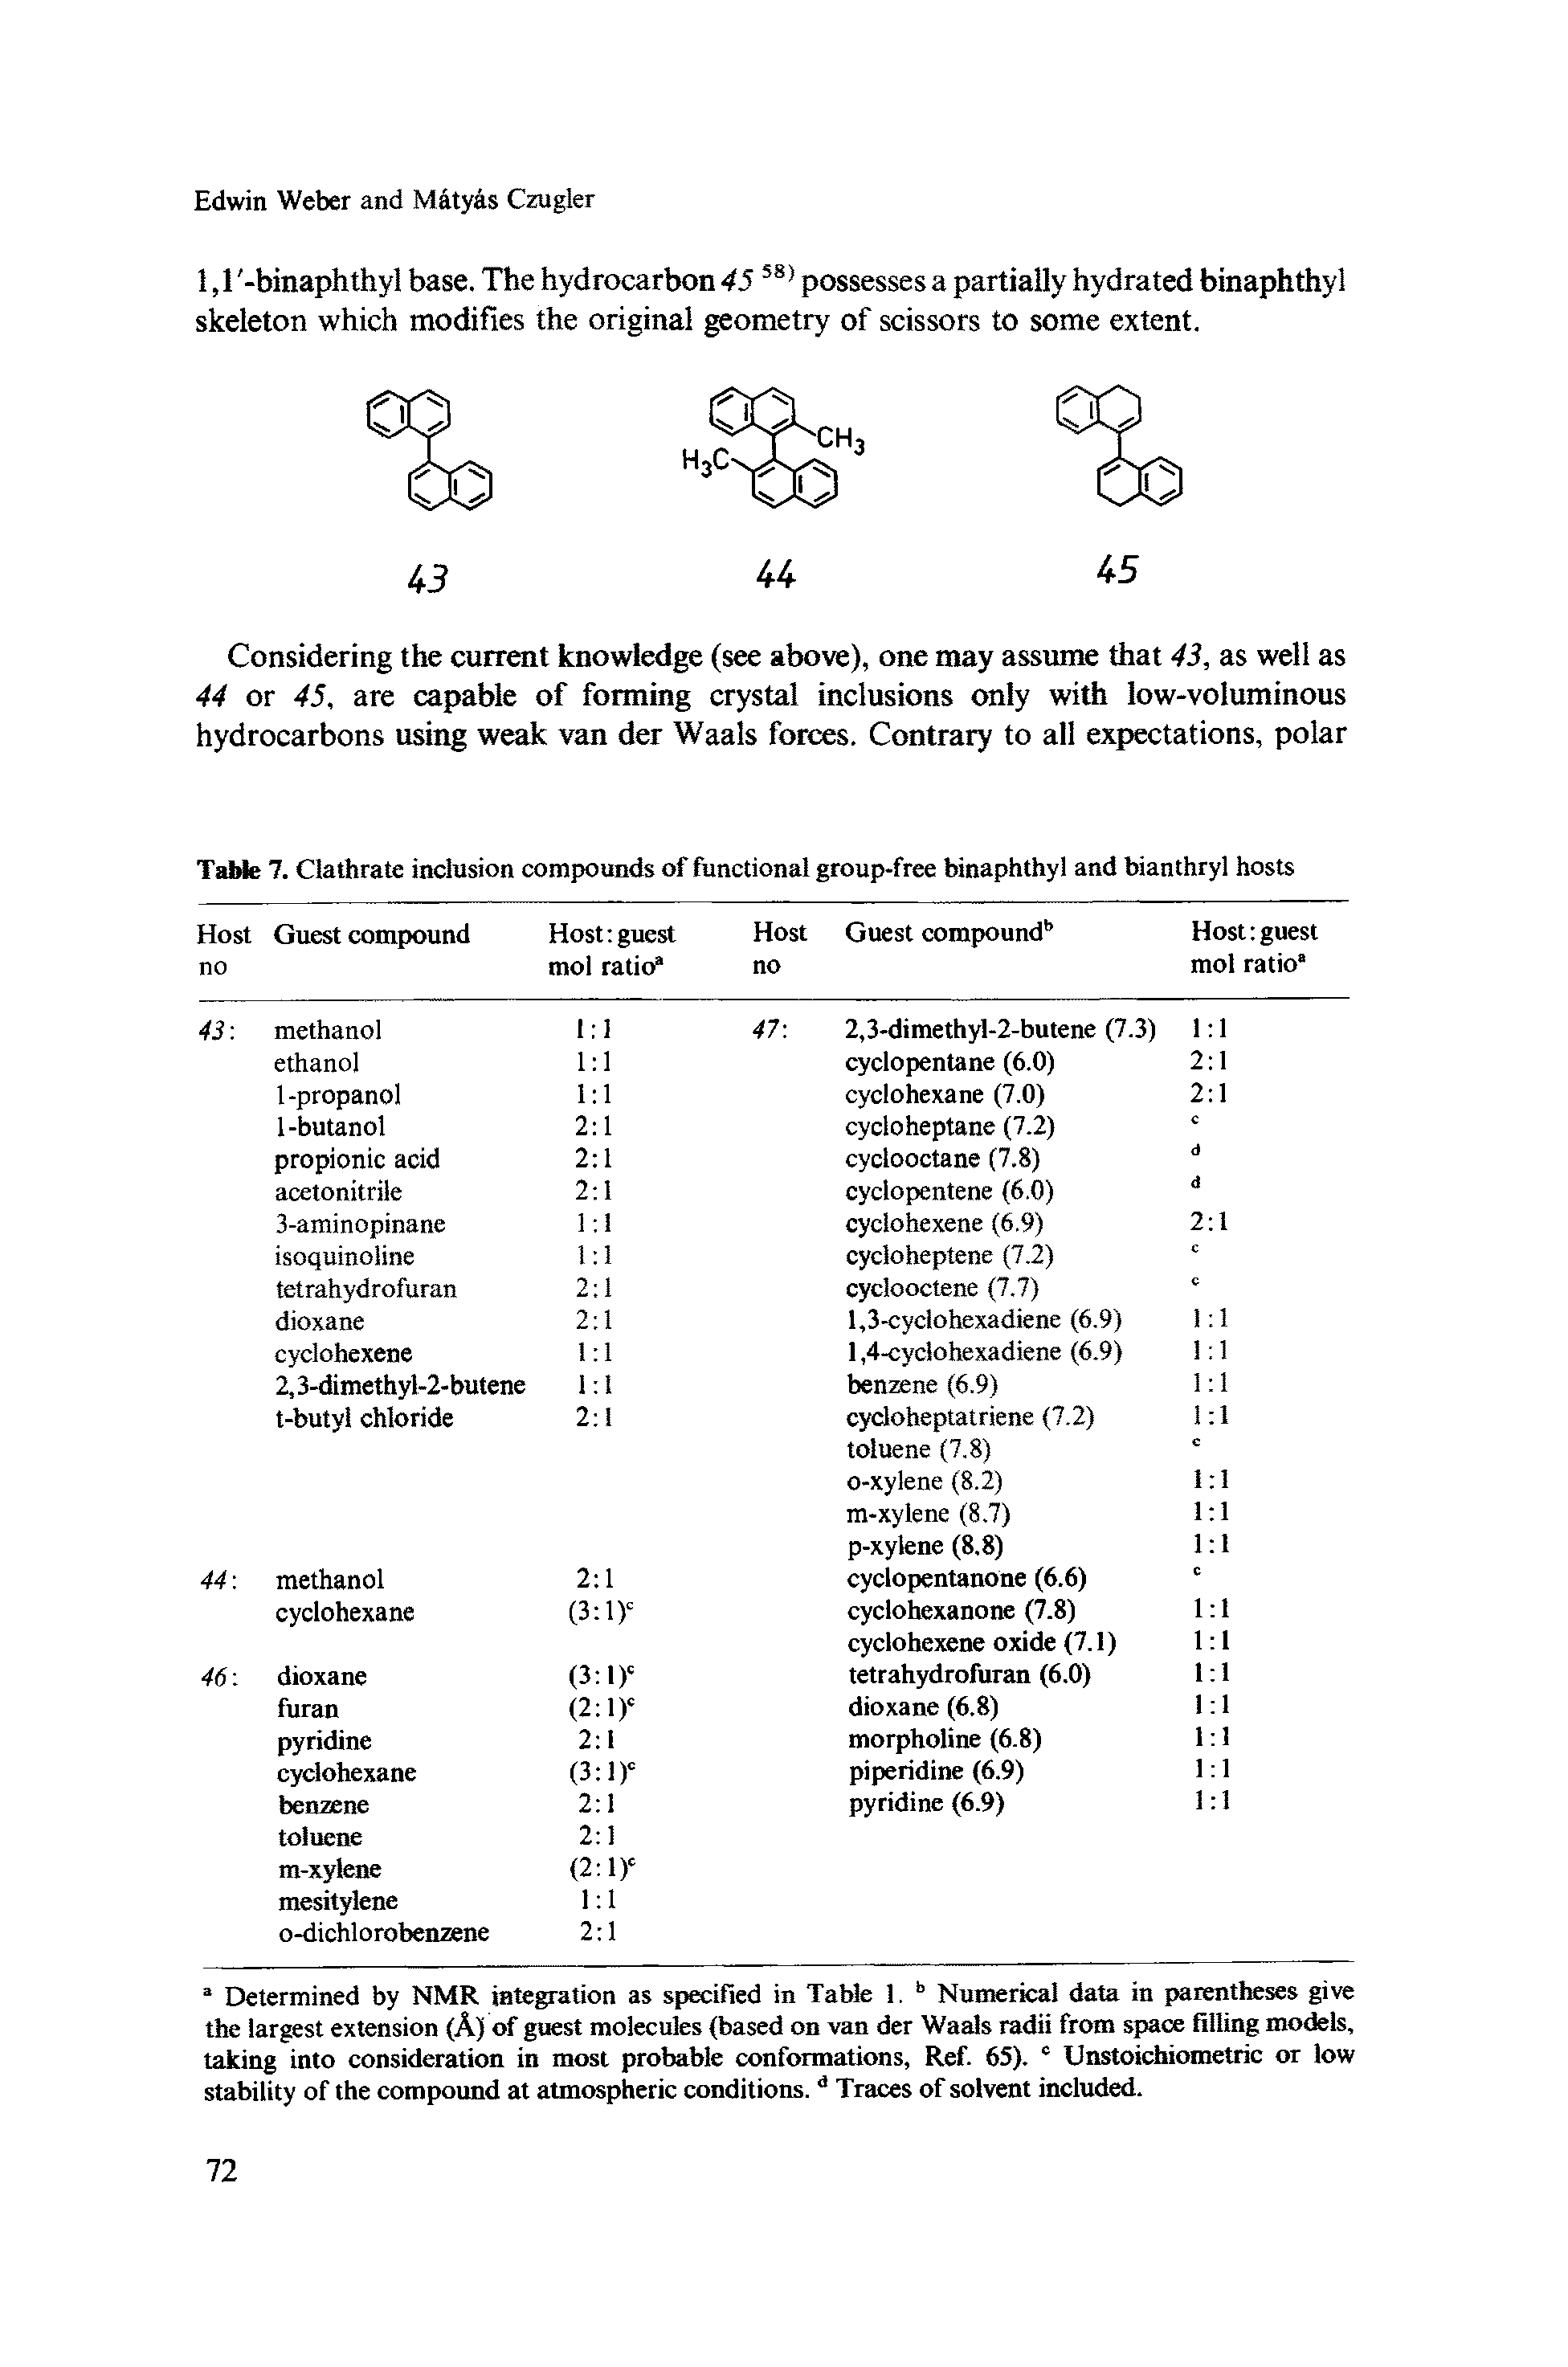 Table 7. Clathrate inclusion compounds of functional group-free binaphthyl and bianthryl hosts...